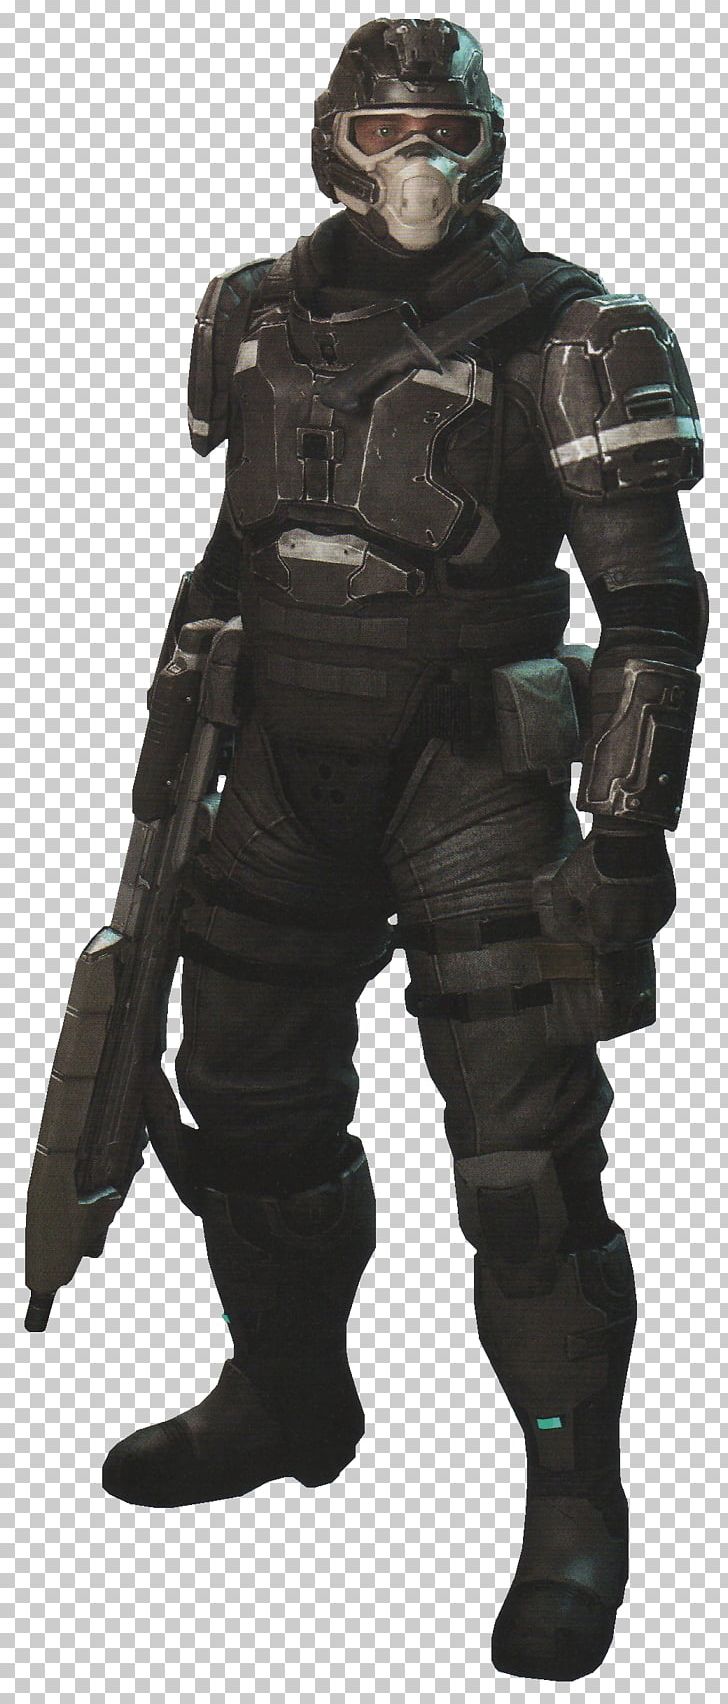 Halo 4 Halo 3: ODST Halo 5: Guardians Halo 2 PNG, Clipart, Armor, Costume, Covenant, Factions Of Halo, Halo Free PNG Download